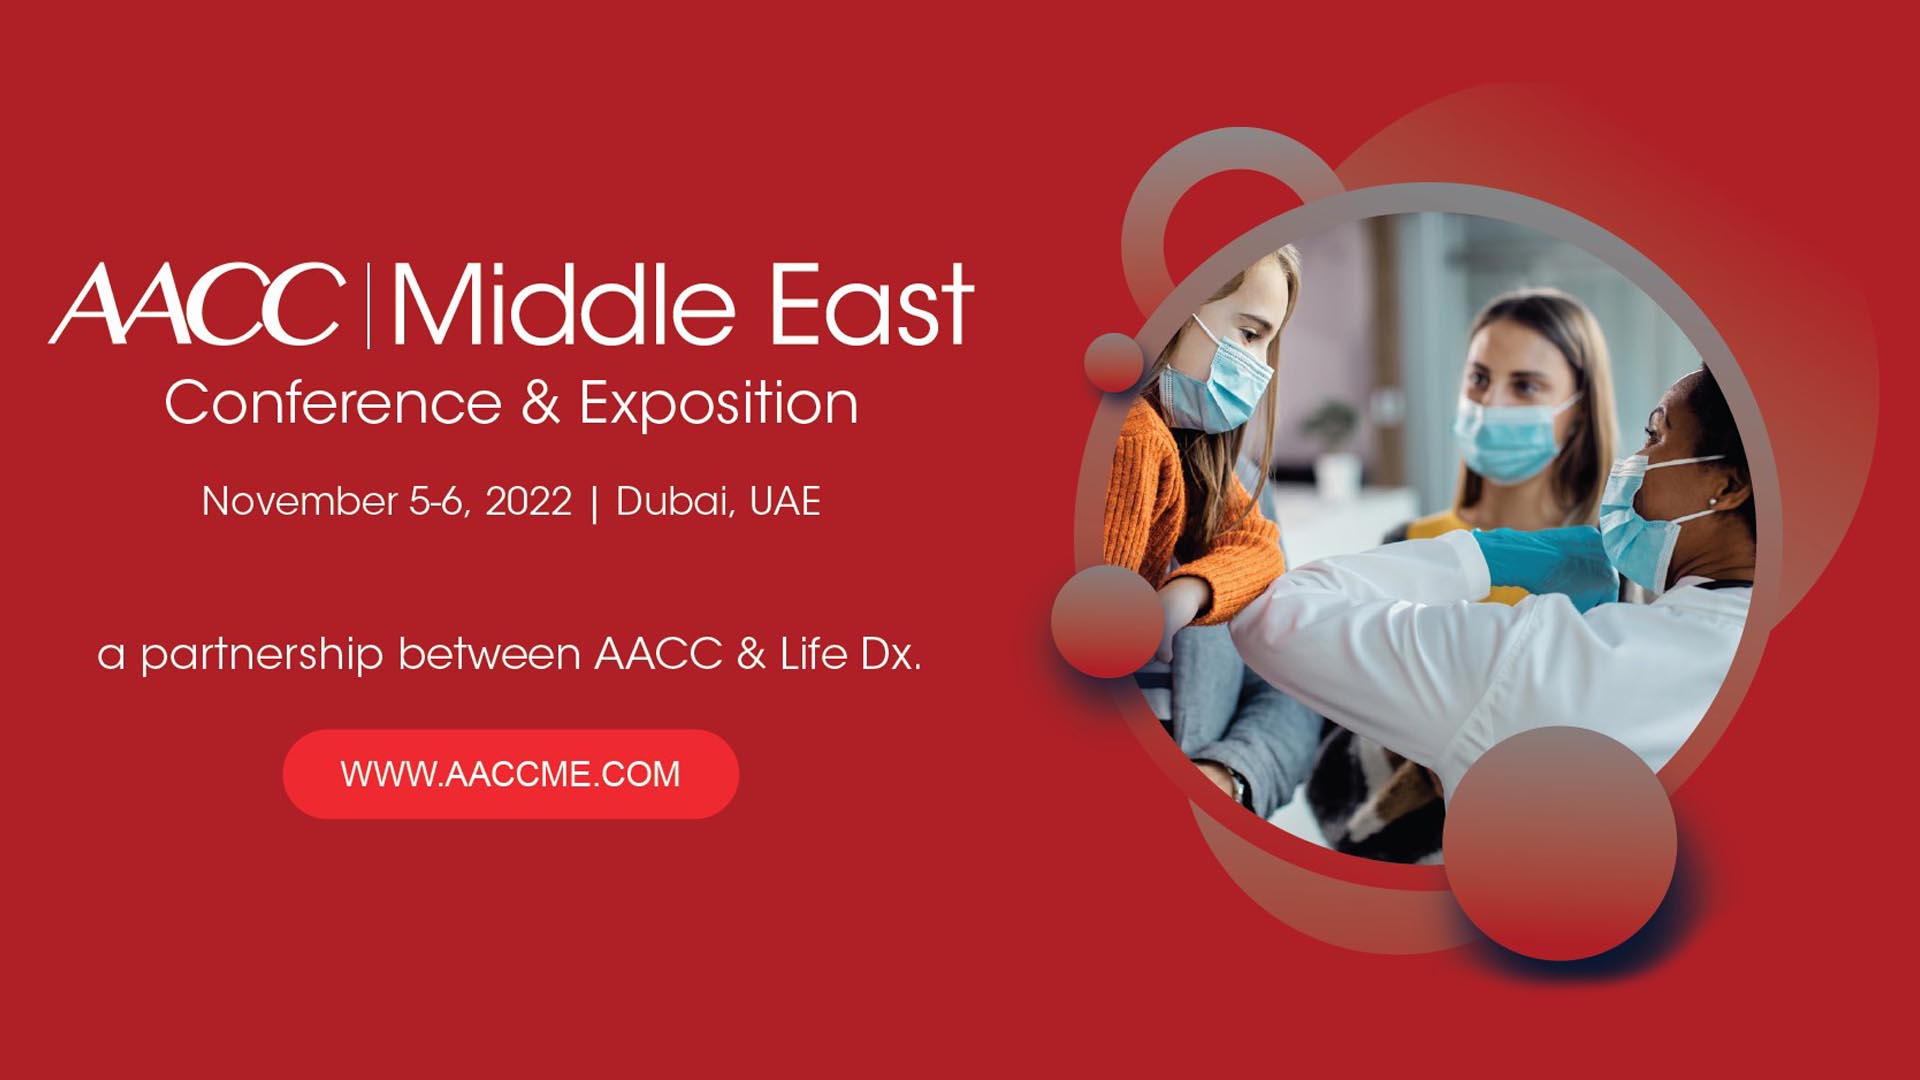 Life Diagnostics to host AACC Middle East medical symposium in Dubai